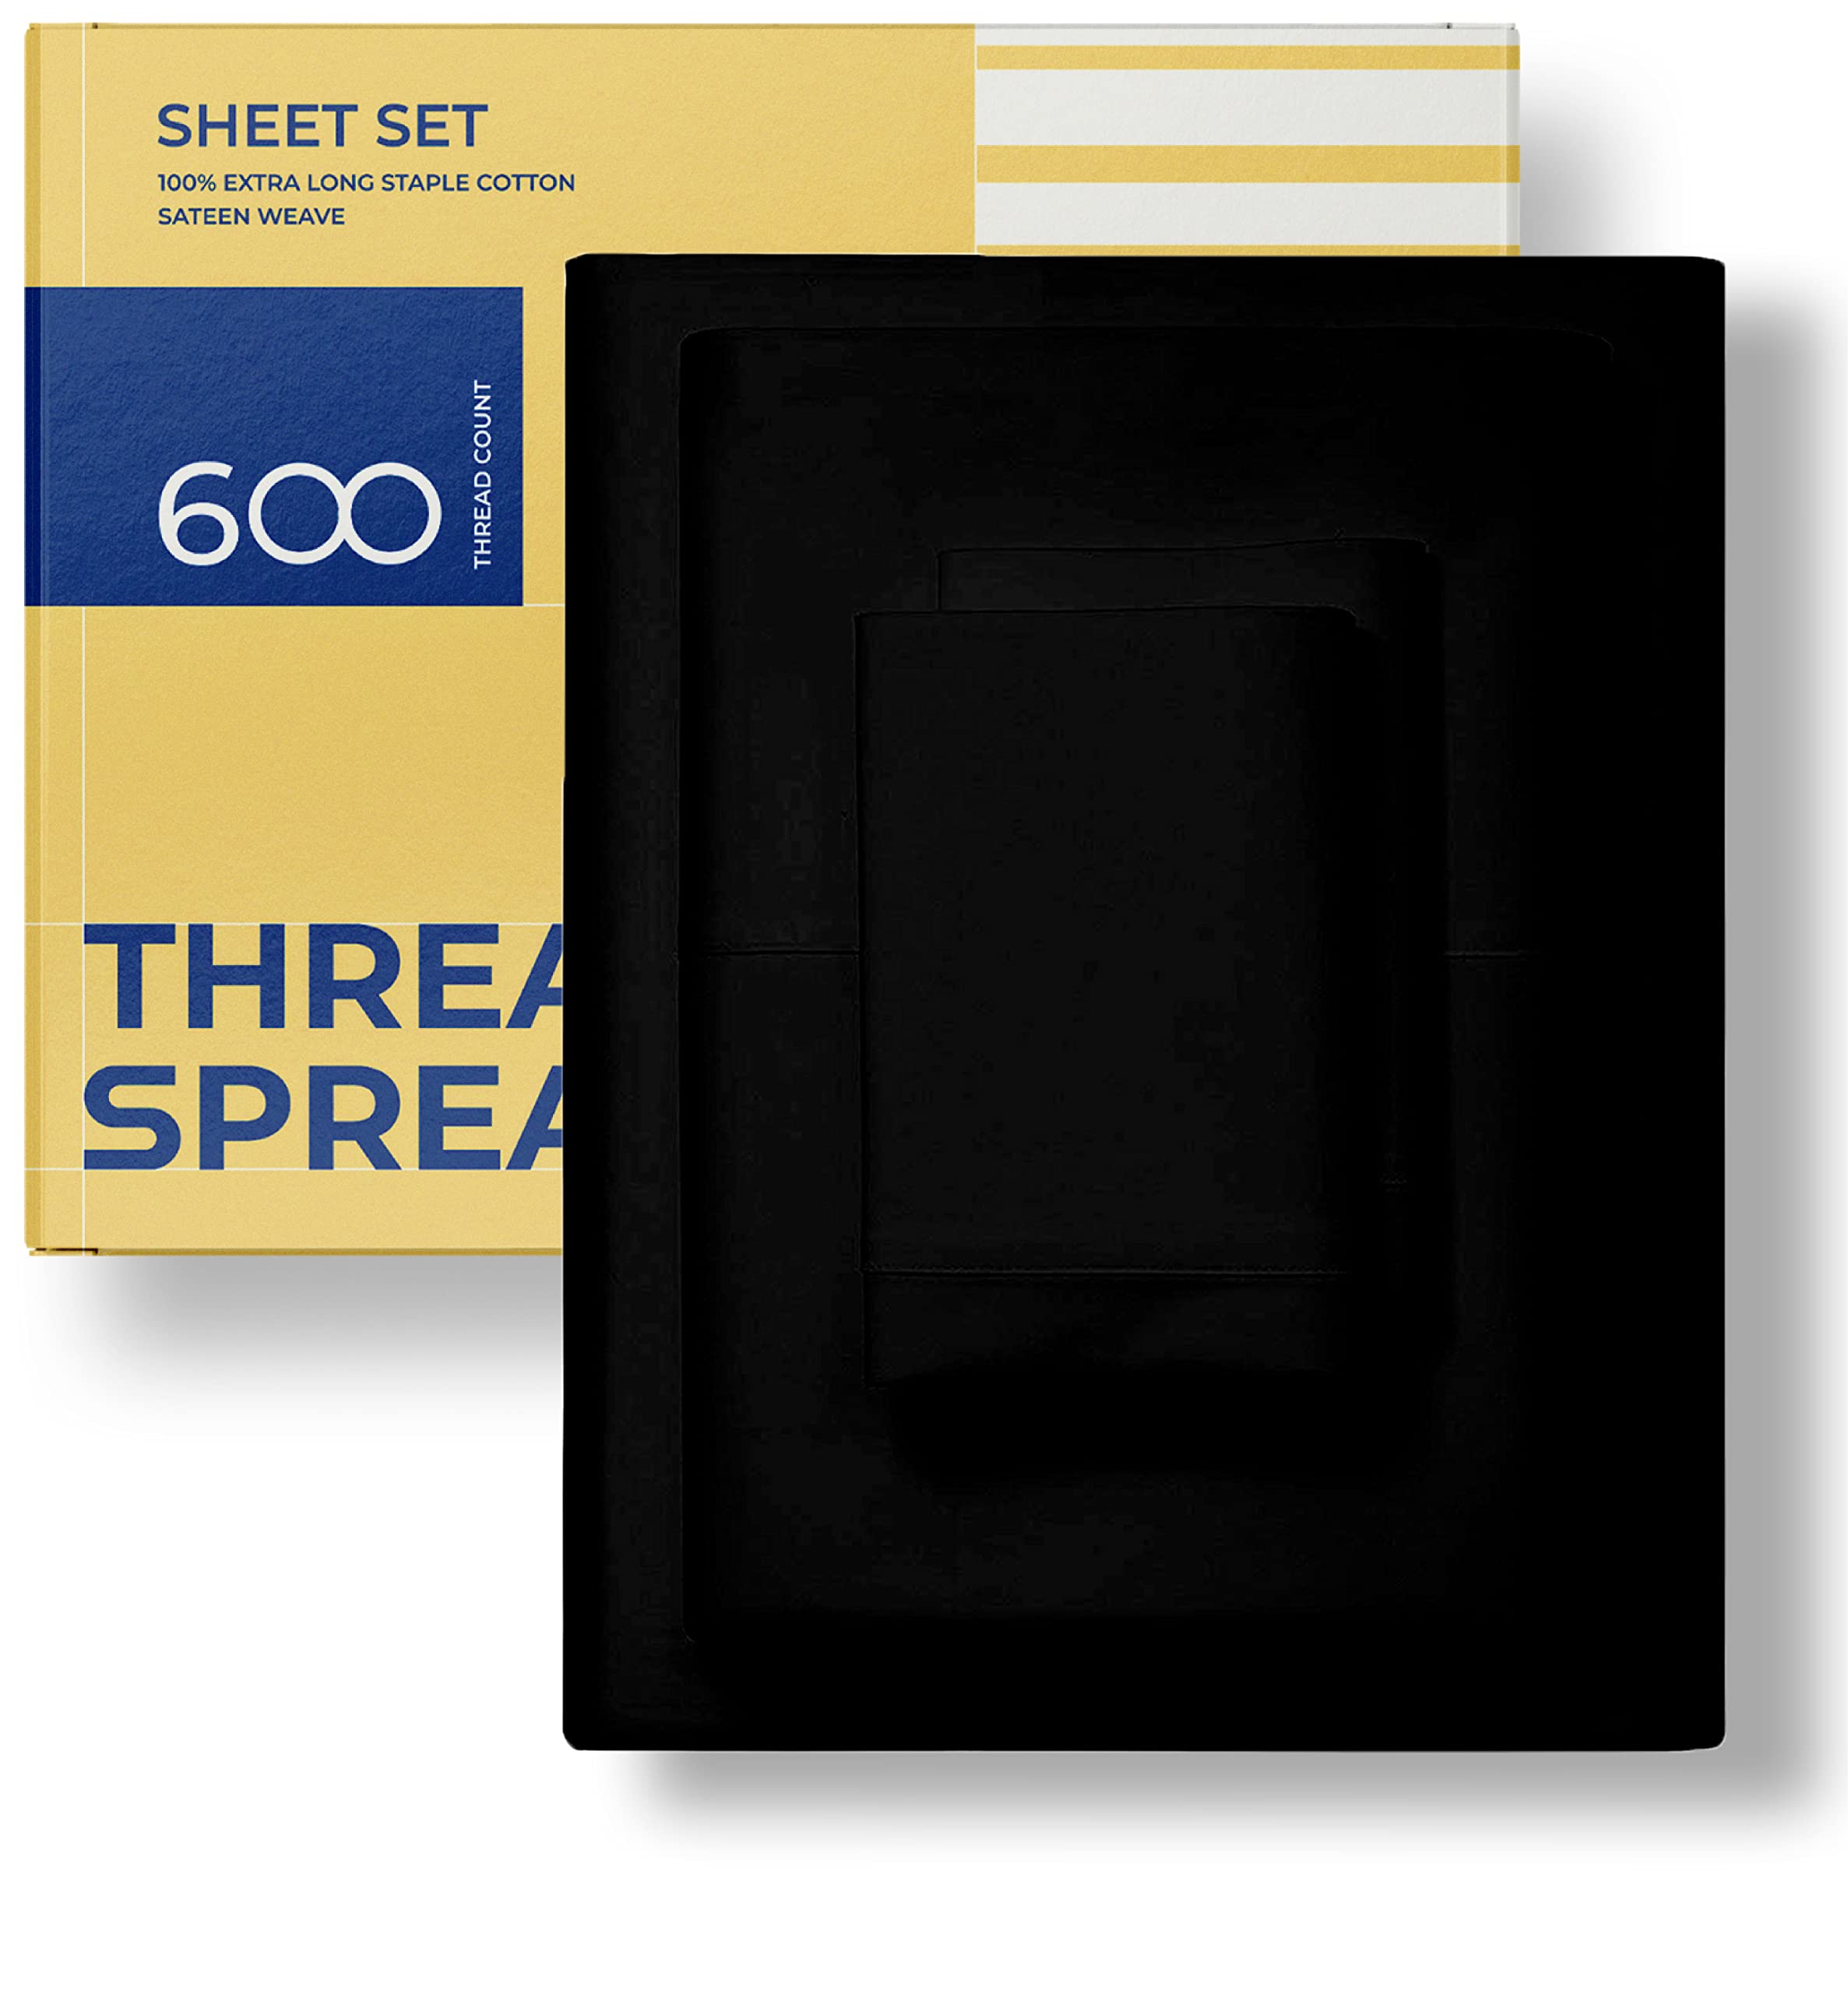 THREAD SPREAD 100% cotton Queen Size Sheet Set - 600 Thread count 4 Piece Set - Hotel Luxury Bed Sheets - Deep Pocket - Easy Fit